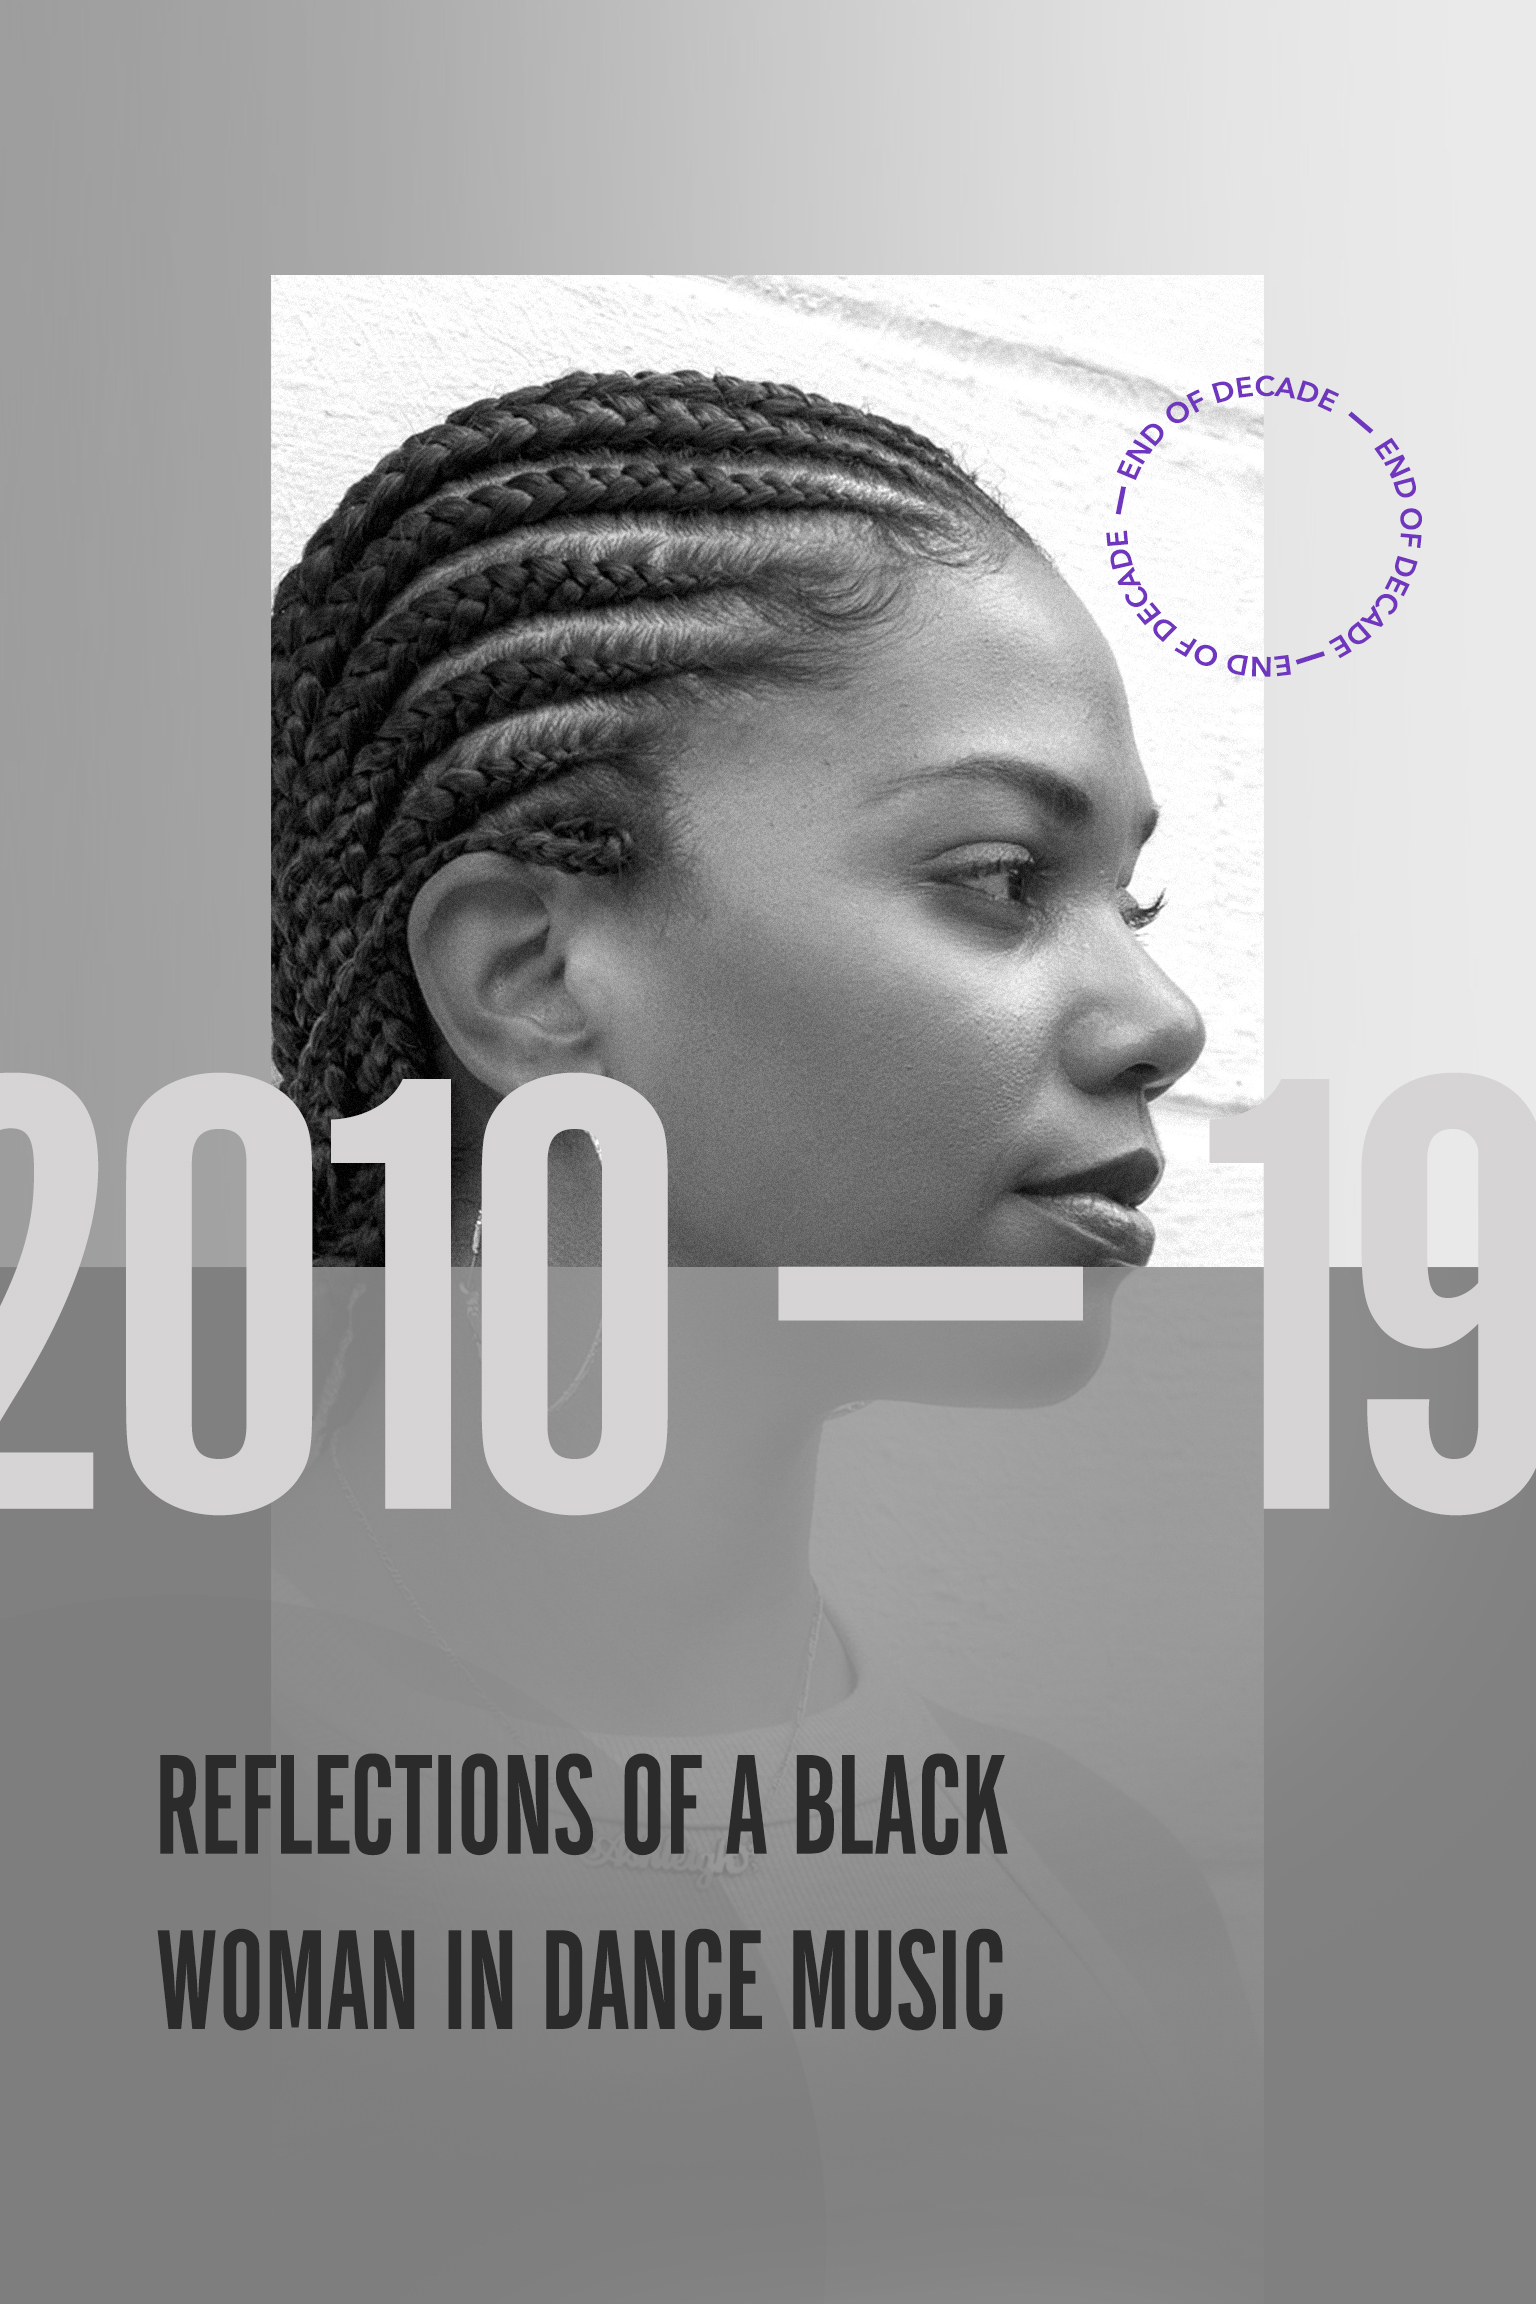 Ra 2010 19 Reflections Of A Black Woman In Dance Music